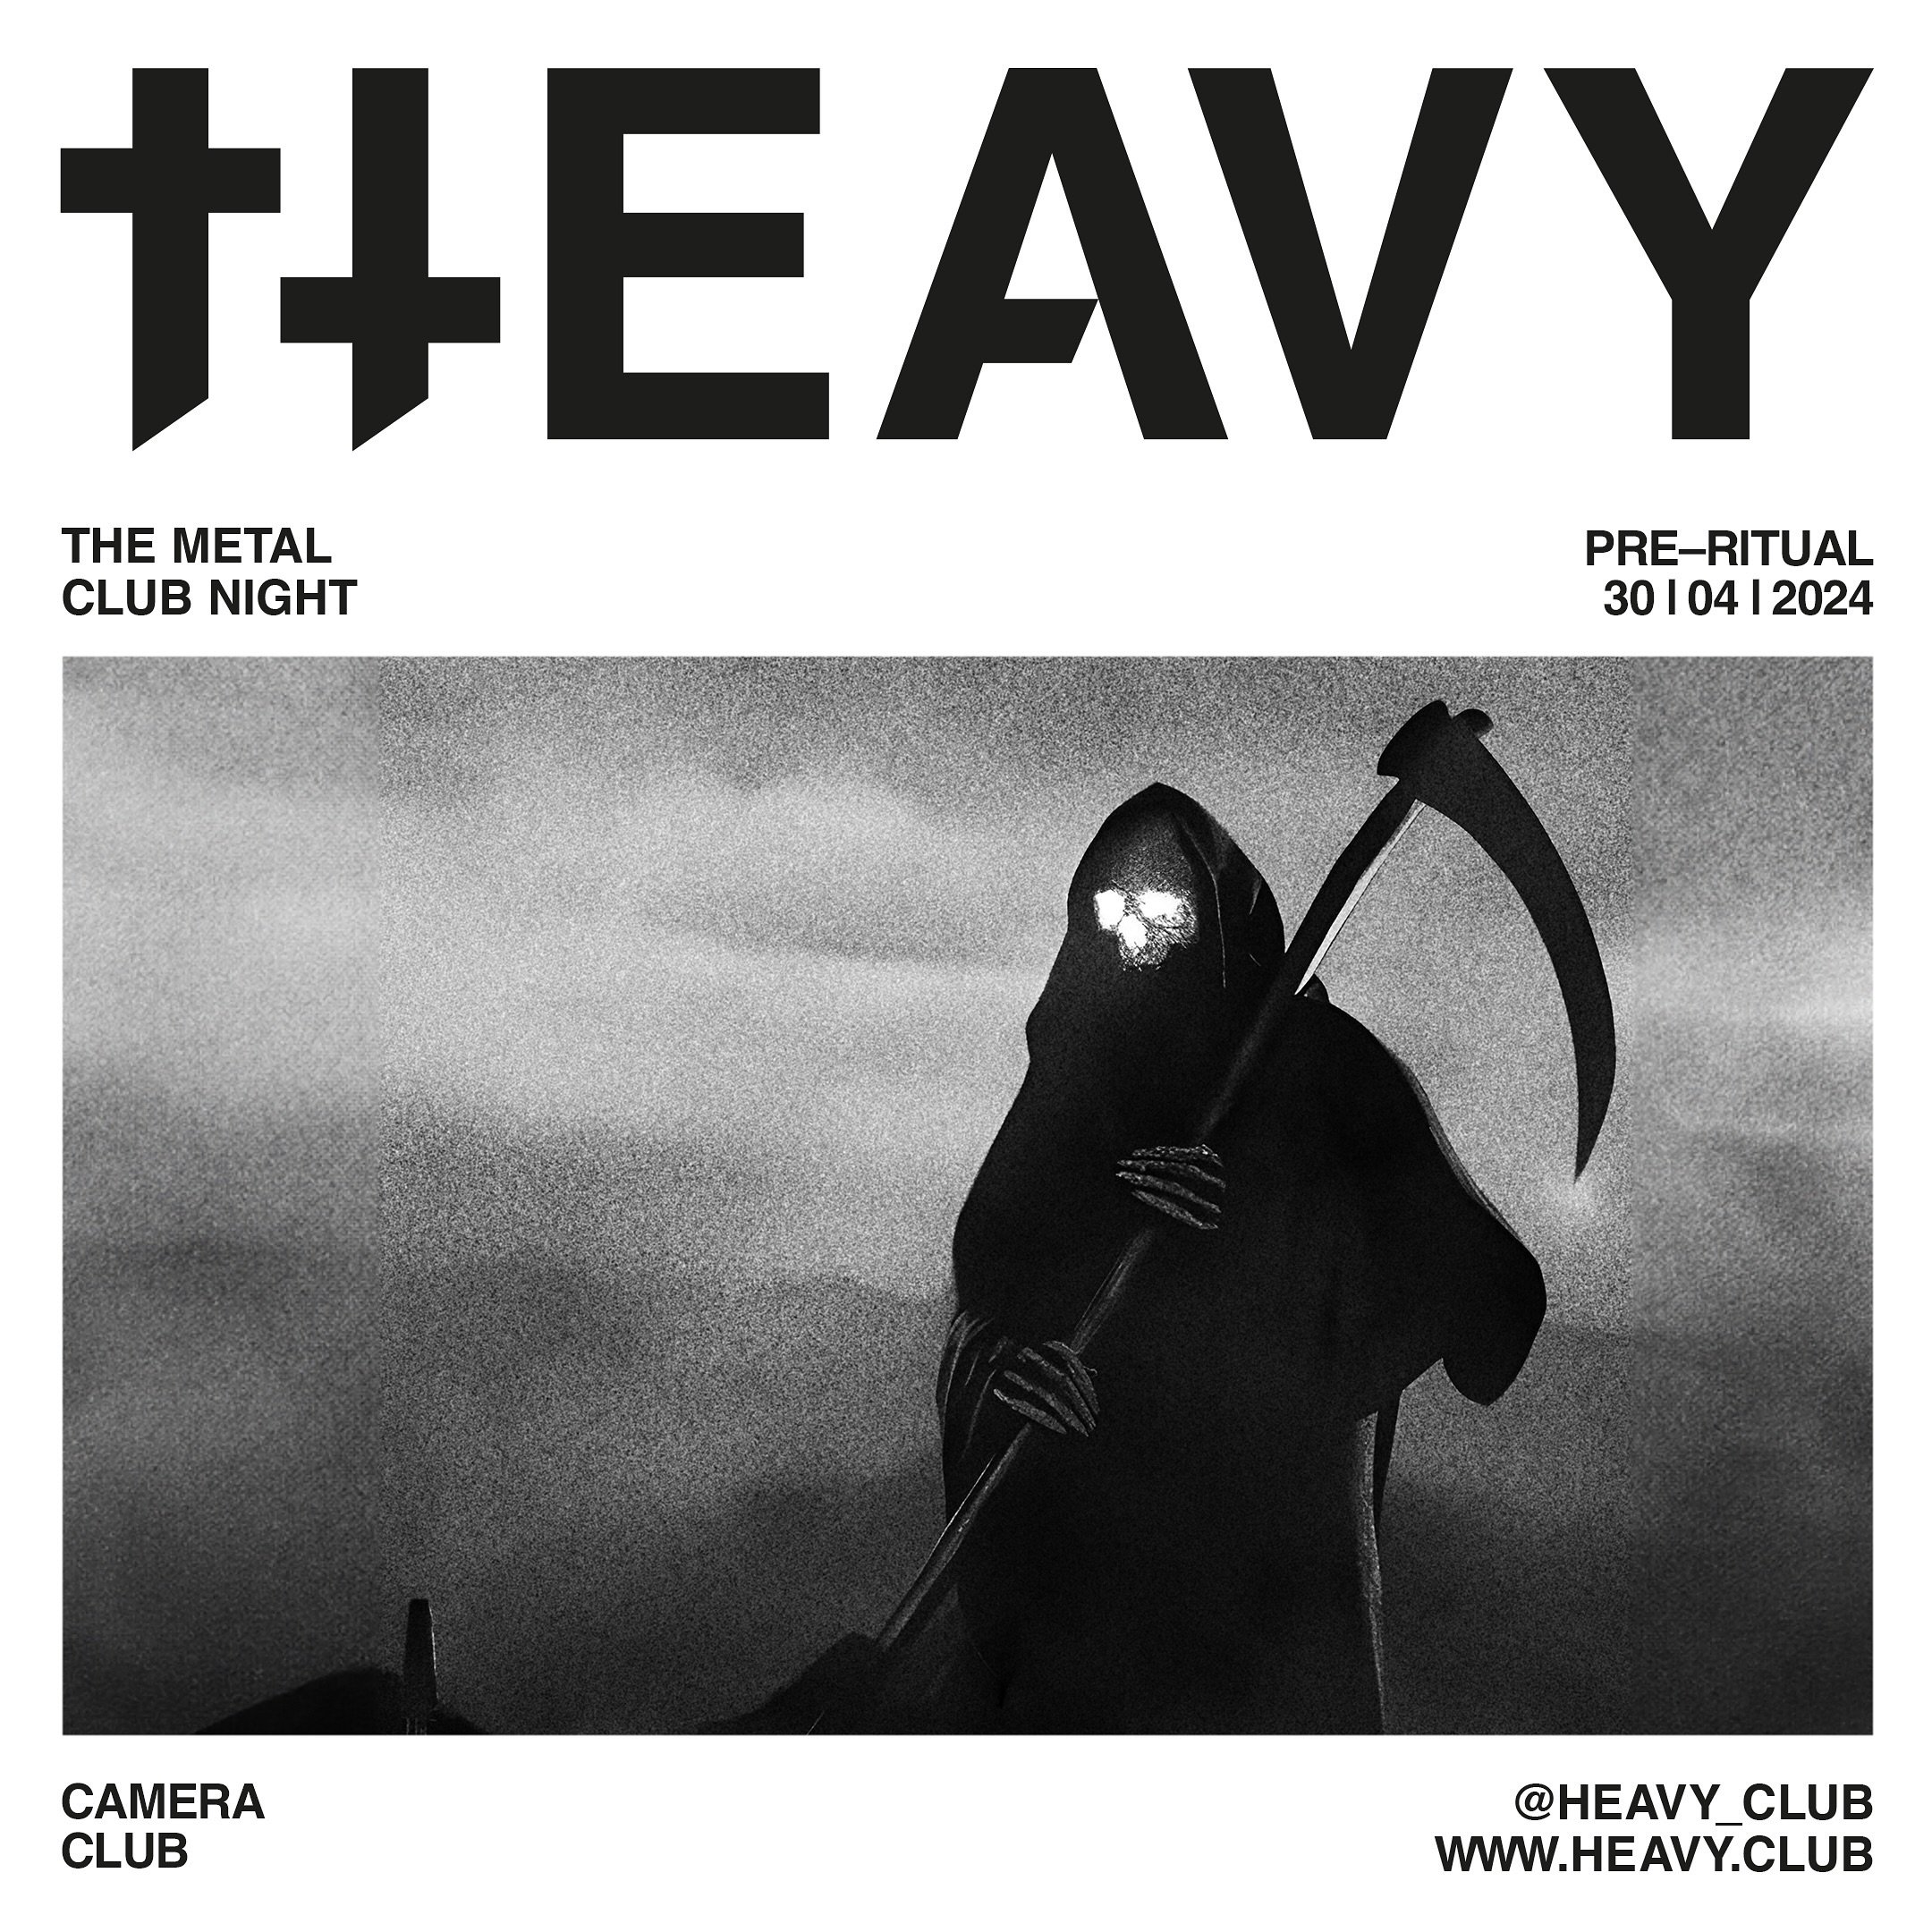 ++1 WEEK TO GO! ++ JOIN US IN THE HEAVY PRE-RITUAL ++ 100% METAL ++ EXCESSIVE &amp; NASTY ++ @cameraclub 30-04-2024 | SMALL VENUE WITH LIMITED TICKETS! GRAB YOUR 🎟️ NOW! www.heavy.club | 🔗 BIO
P.S: NEXT DAY IS PUBLIC HOLIDAY. TOTAL CARNAGE IS INEVI